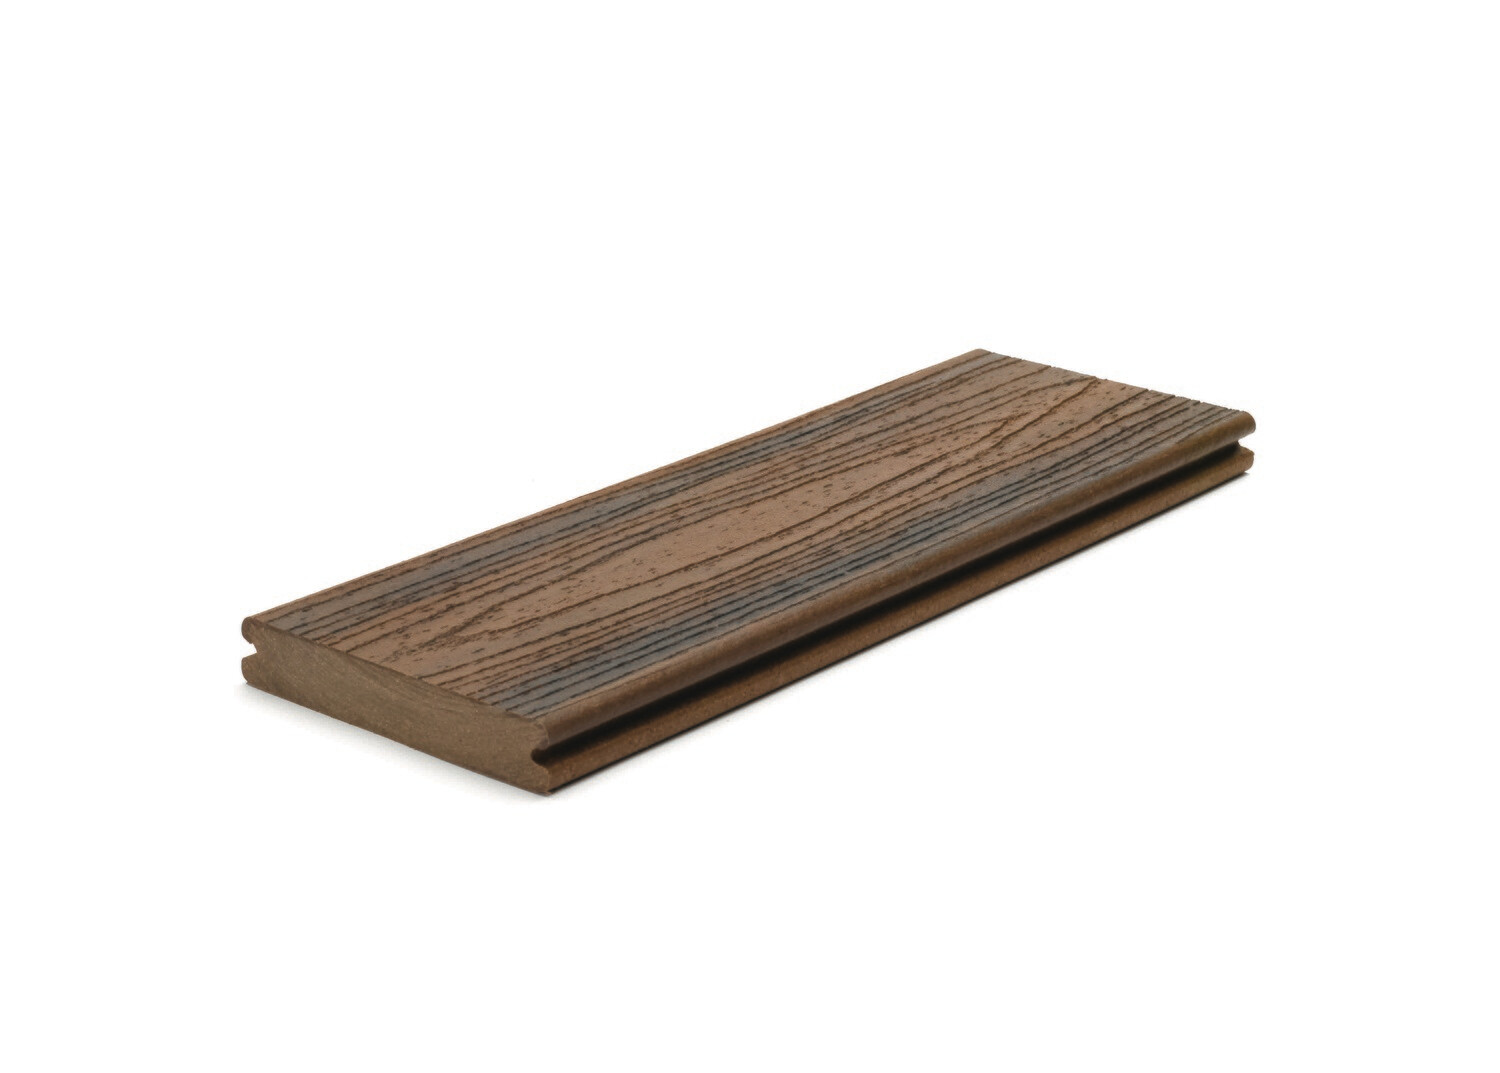 Spiced Rum - Trex™ Transcend Deck board (Grooved)(25x140mm) - 3.6m Lengths